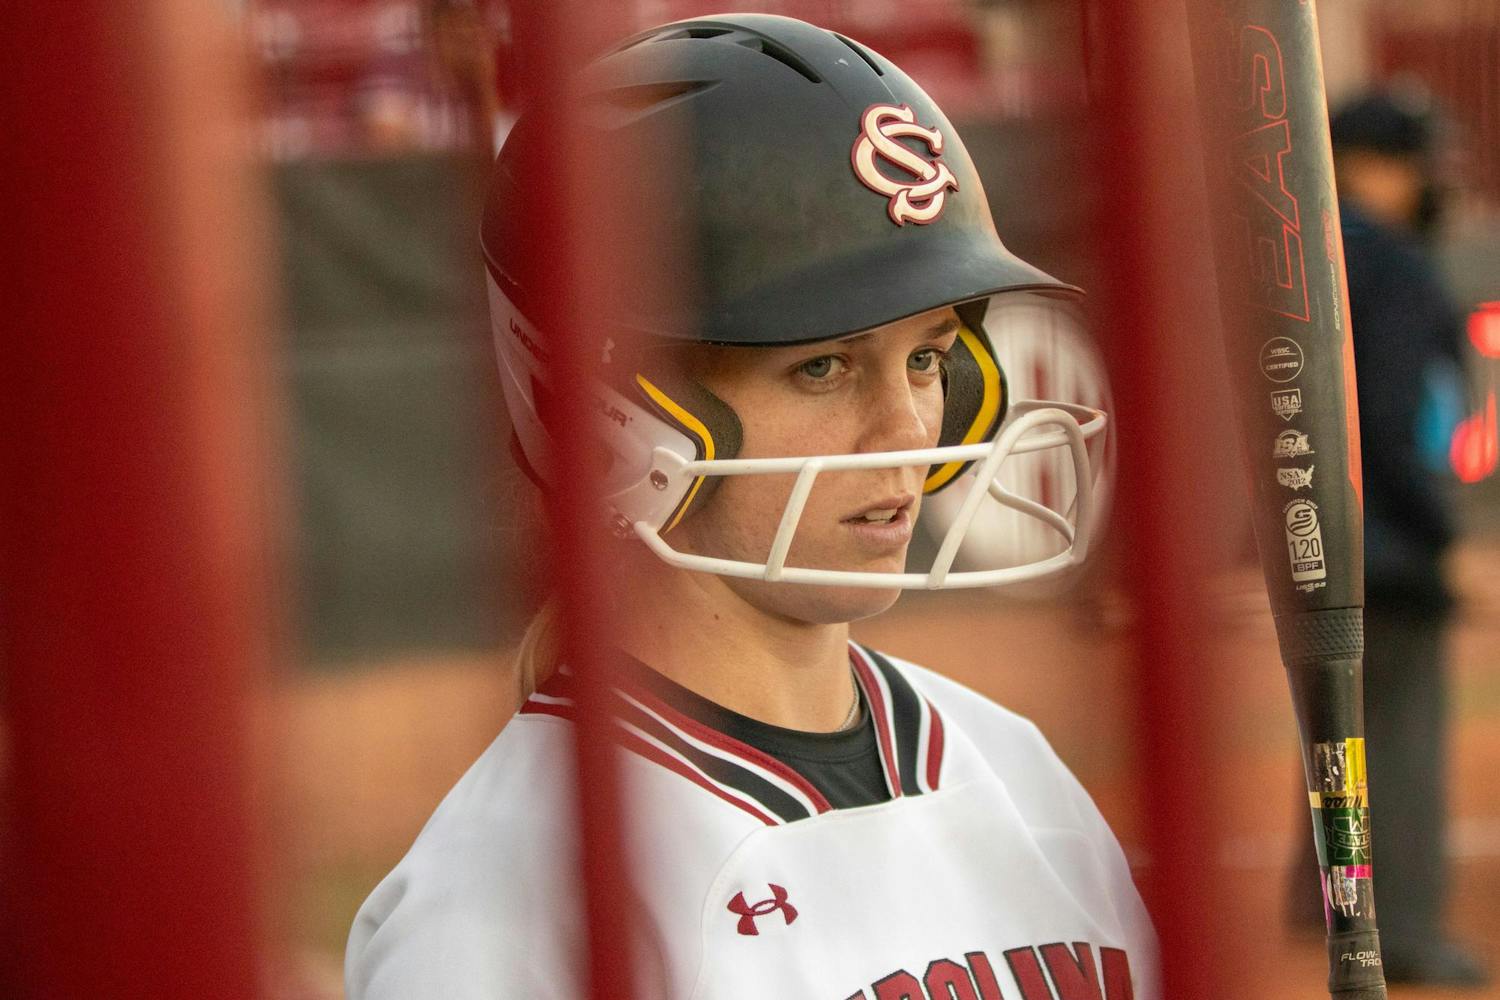 Senior infielder Riley Blampied looks to the dugout before an at-bat during South Carolina's game against Mississippi State on April 5, 2024. Blampied earned one hit in three at-bats during the ɫɫƵs' 6-0 loss to the Bulldogs.